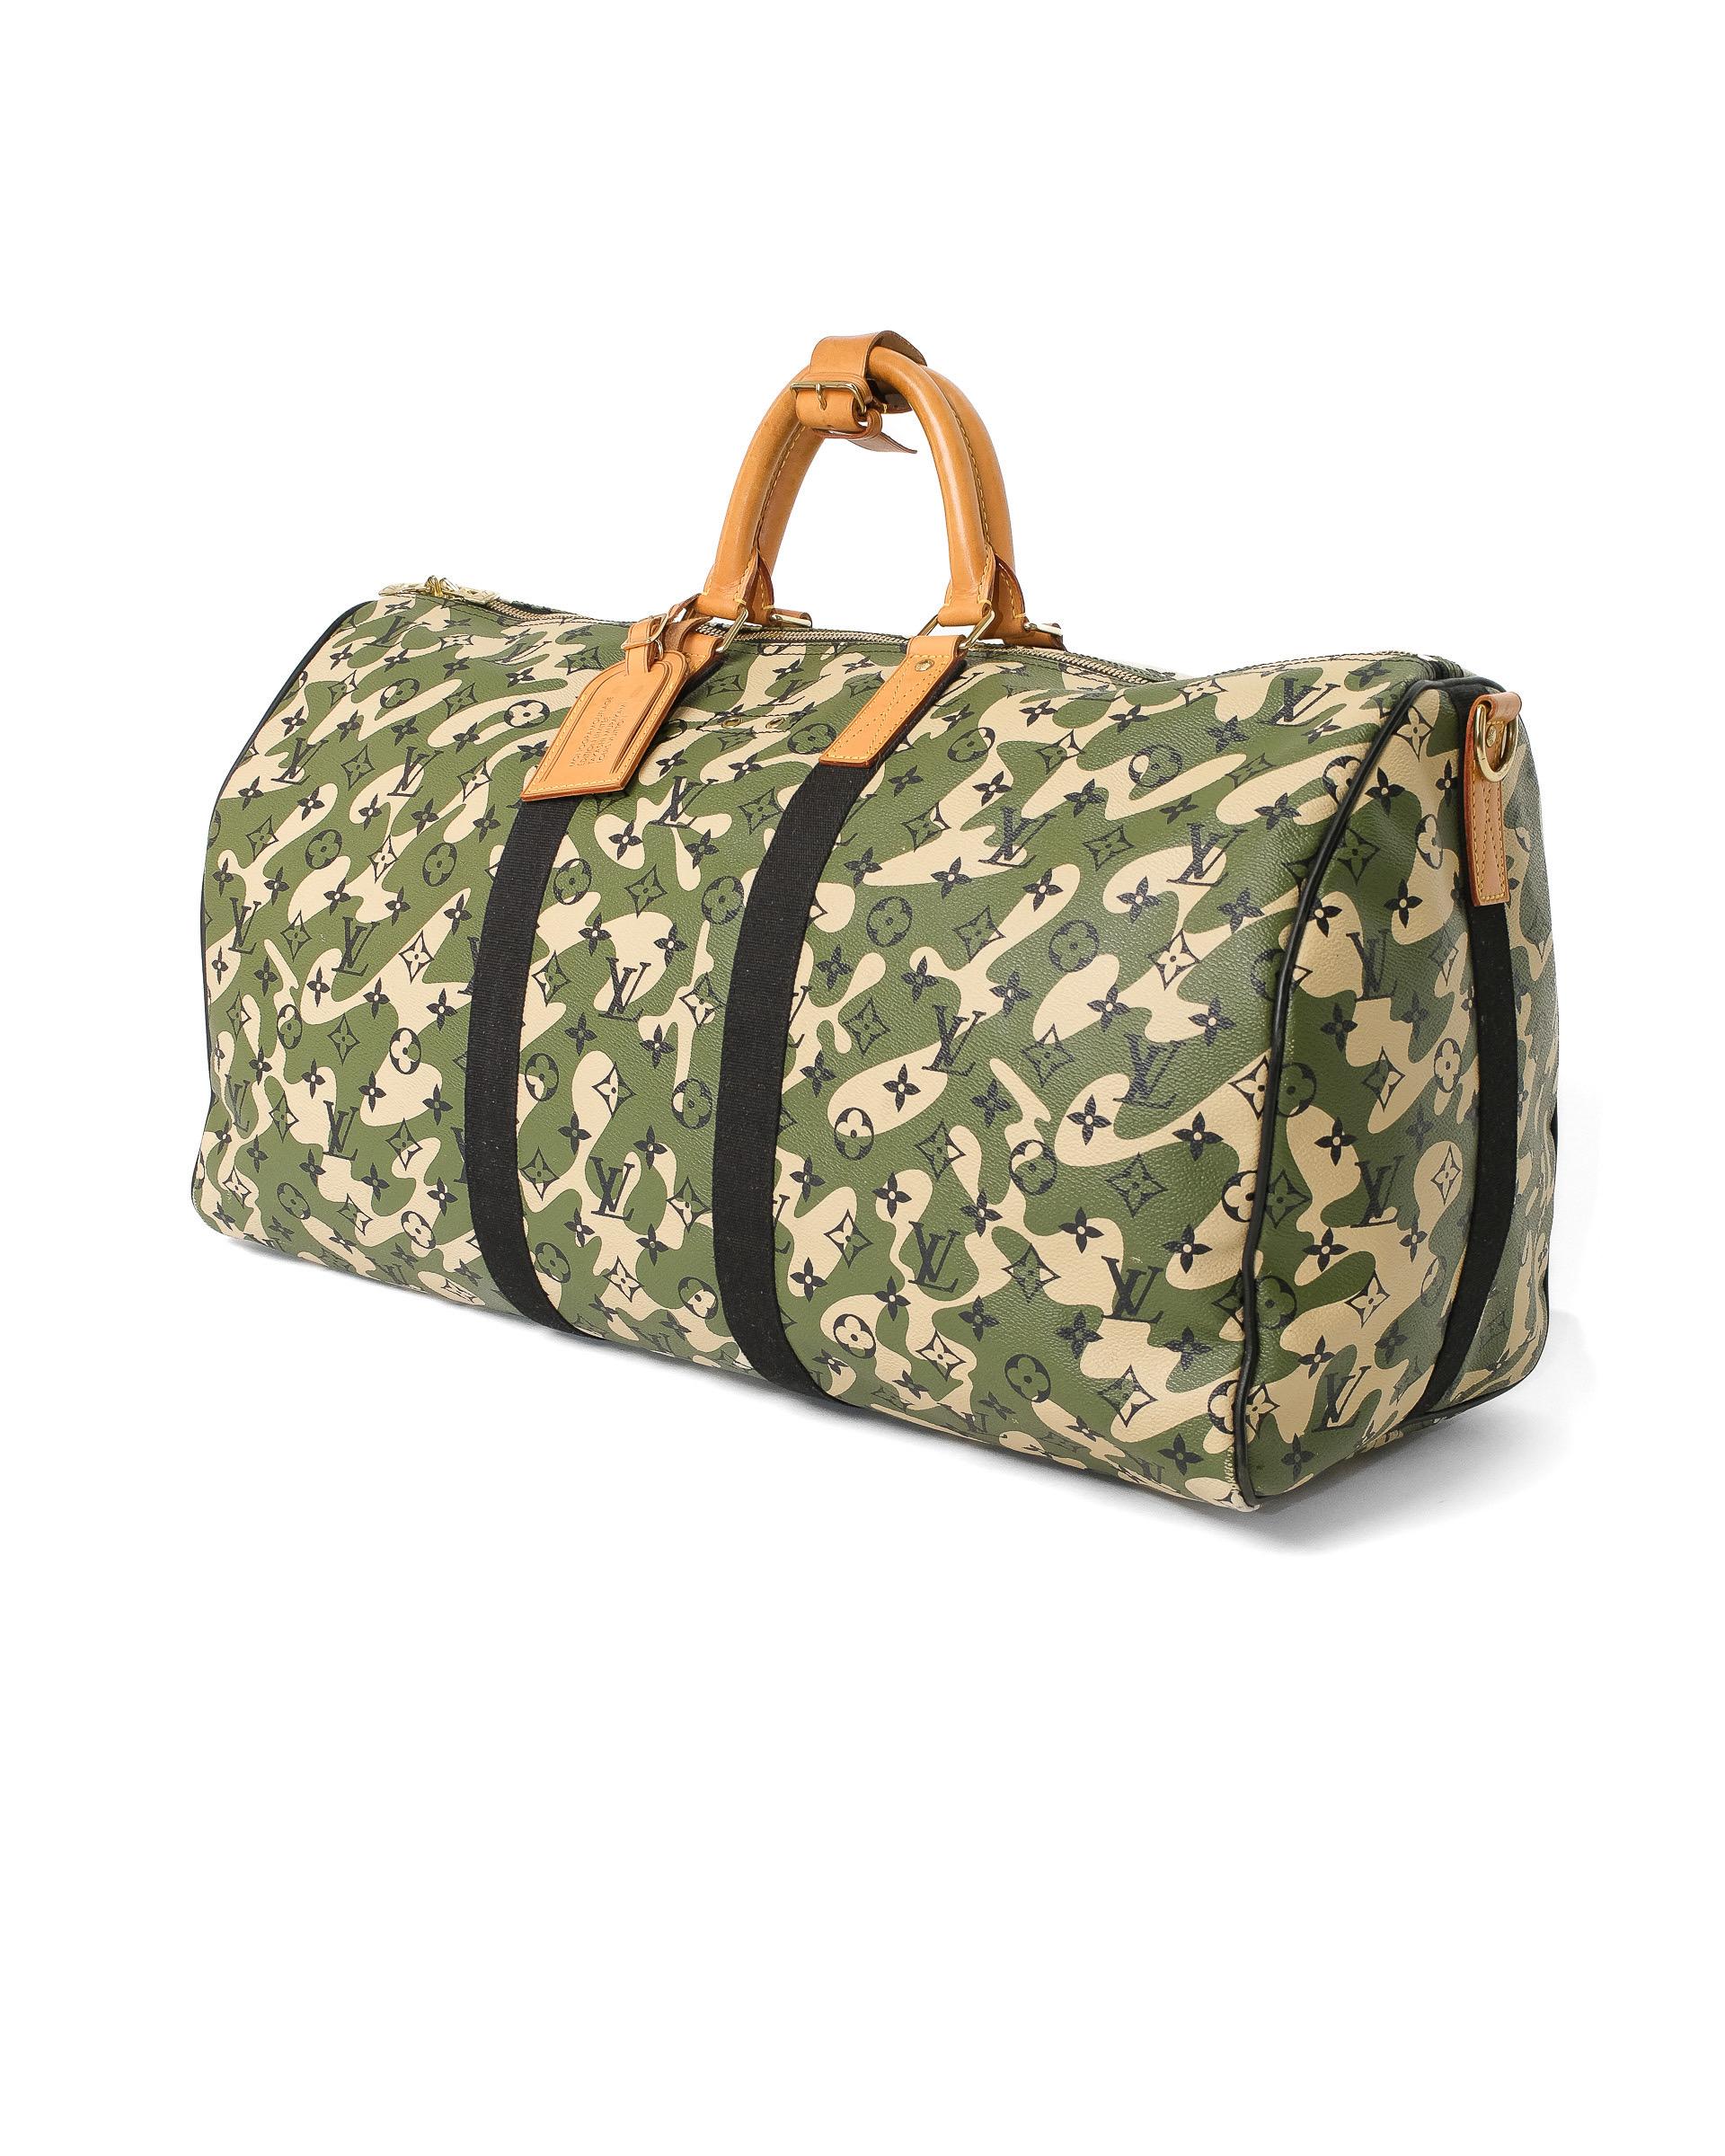 Louis Vuitton x Takashi Murakami Keepall 55 Bandoulière Camouflage L.E. In Excellent Condition For Sale In Torre Del Greco, IT